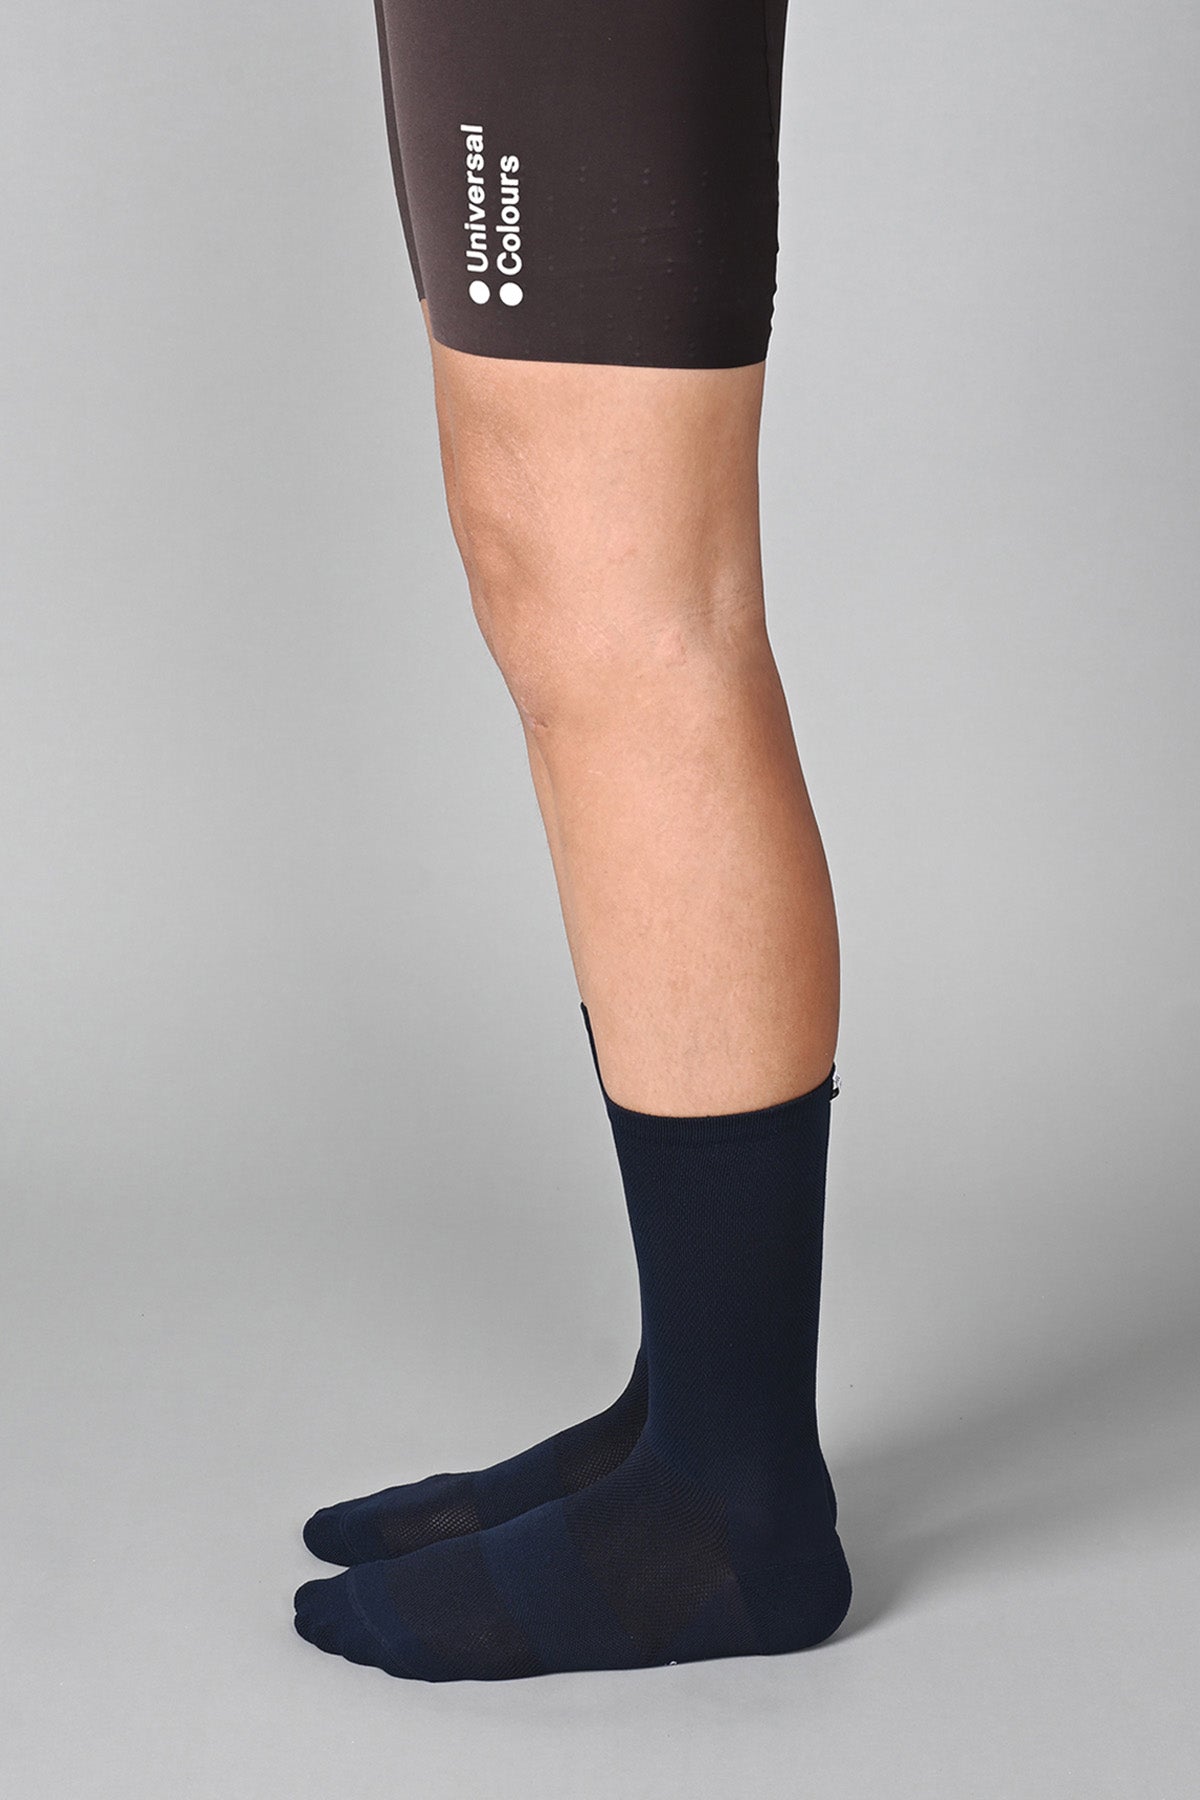 STEALTH - NAVY SIDE | BEST CYCLING SOCKS